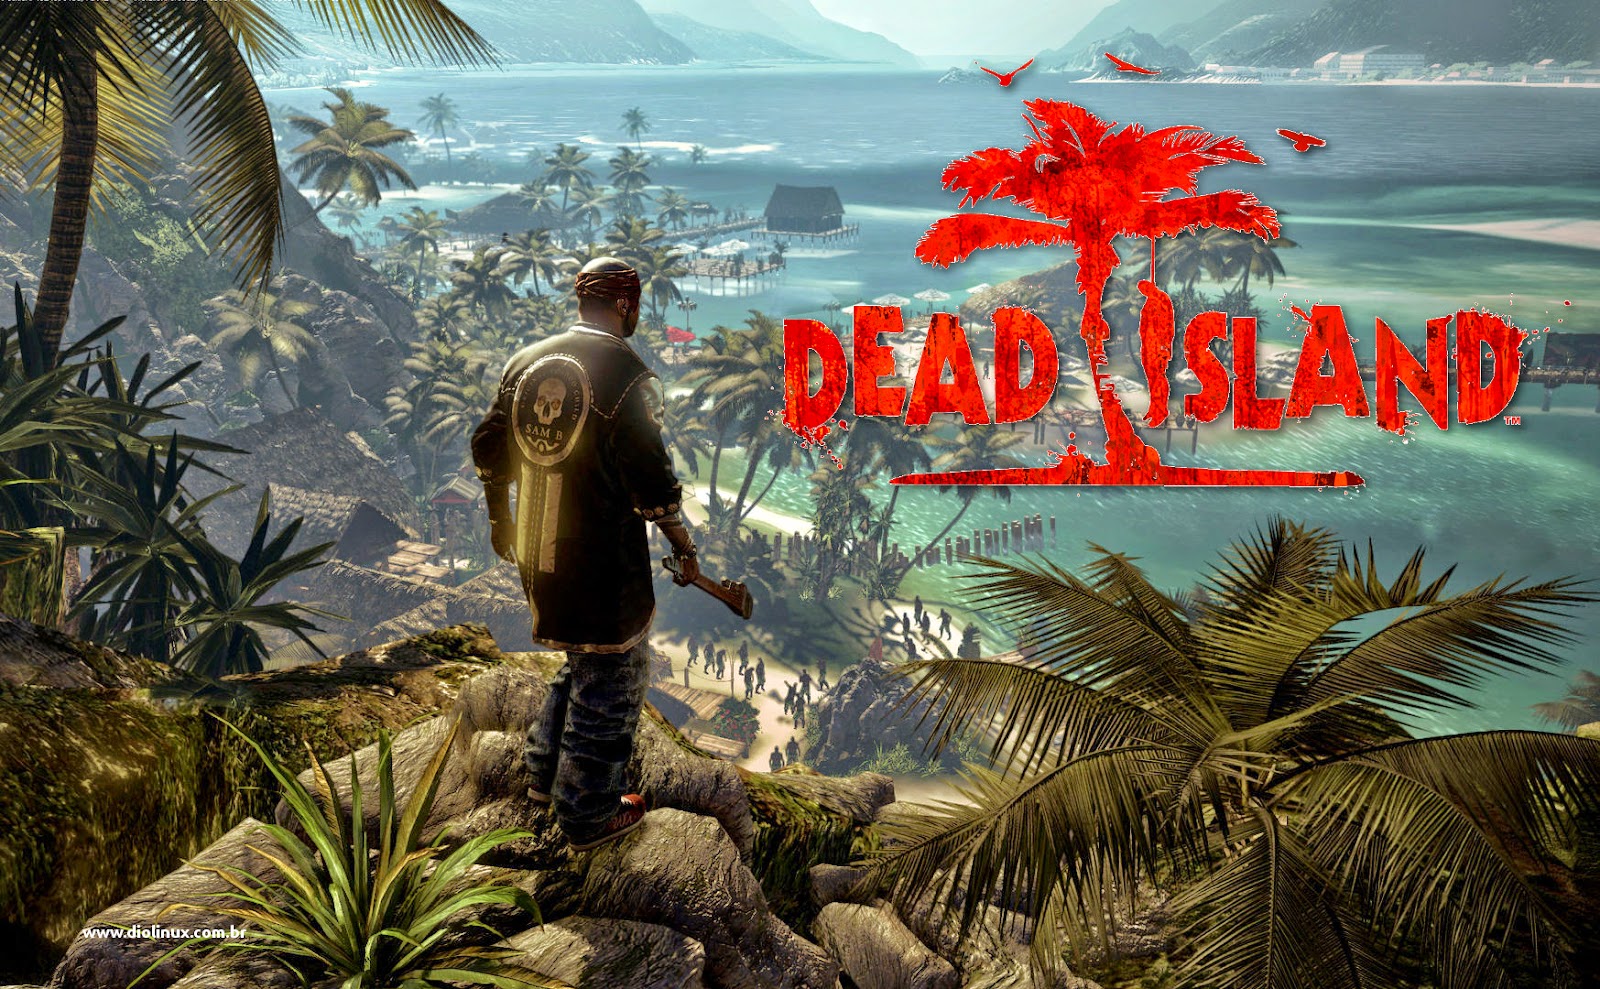 Dead Island (Game of the Year Edition) lançado para Linux